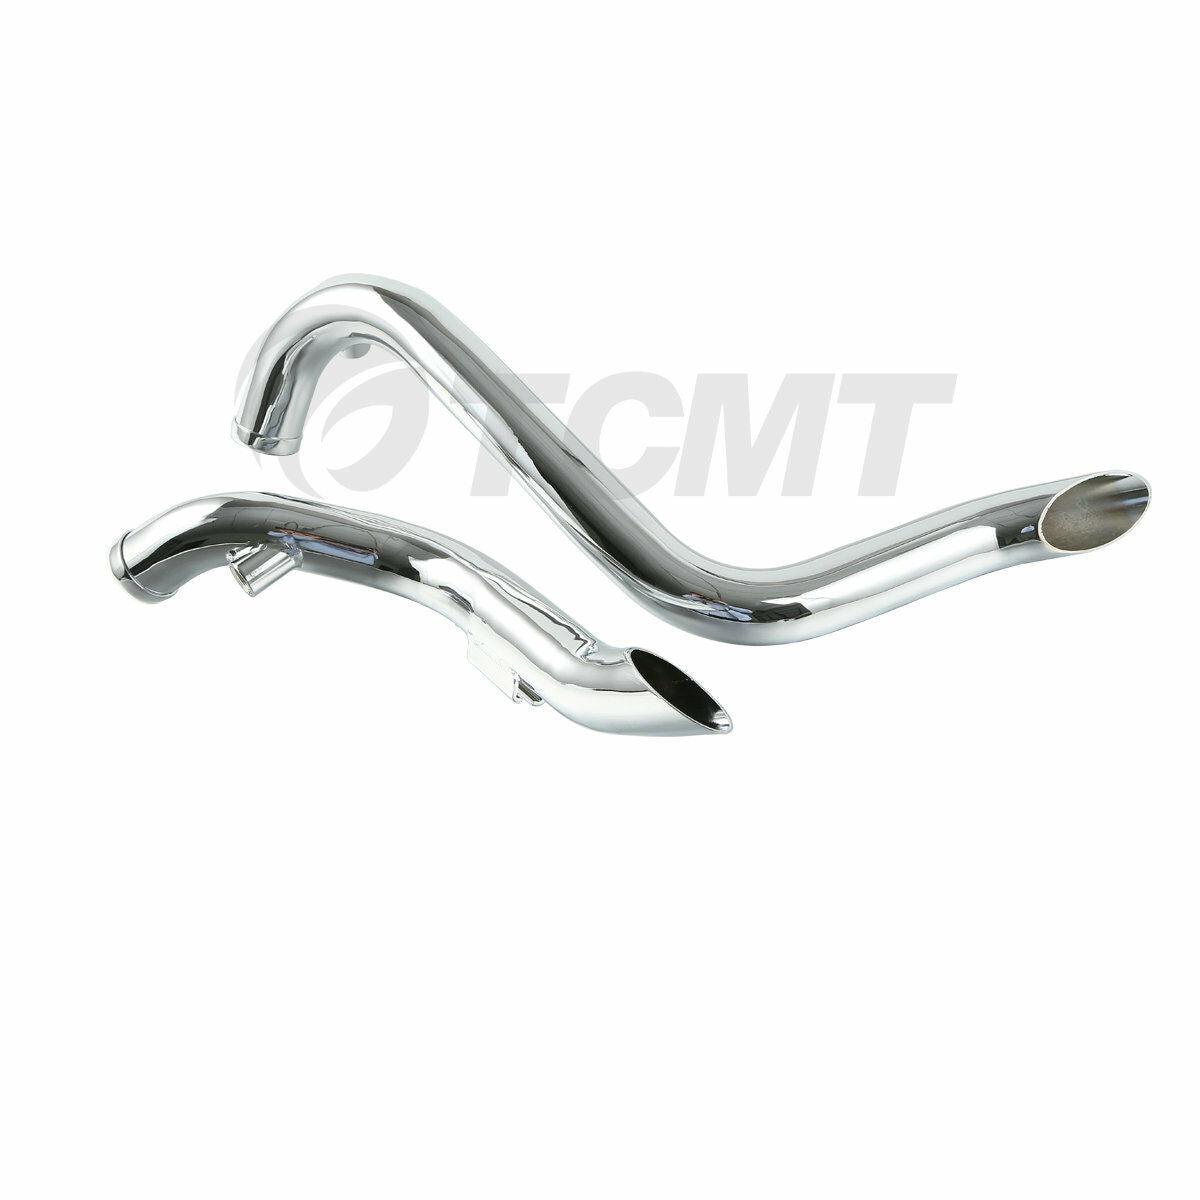 1 3/4" Pipes Exhaust Fit For Harley Touring Road King Electra Glide Drag 84-16 - Moto Life Products